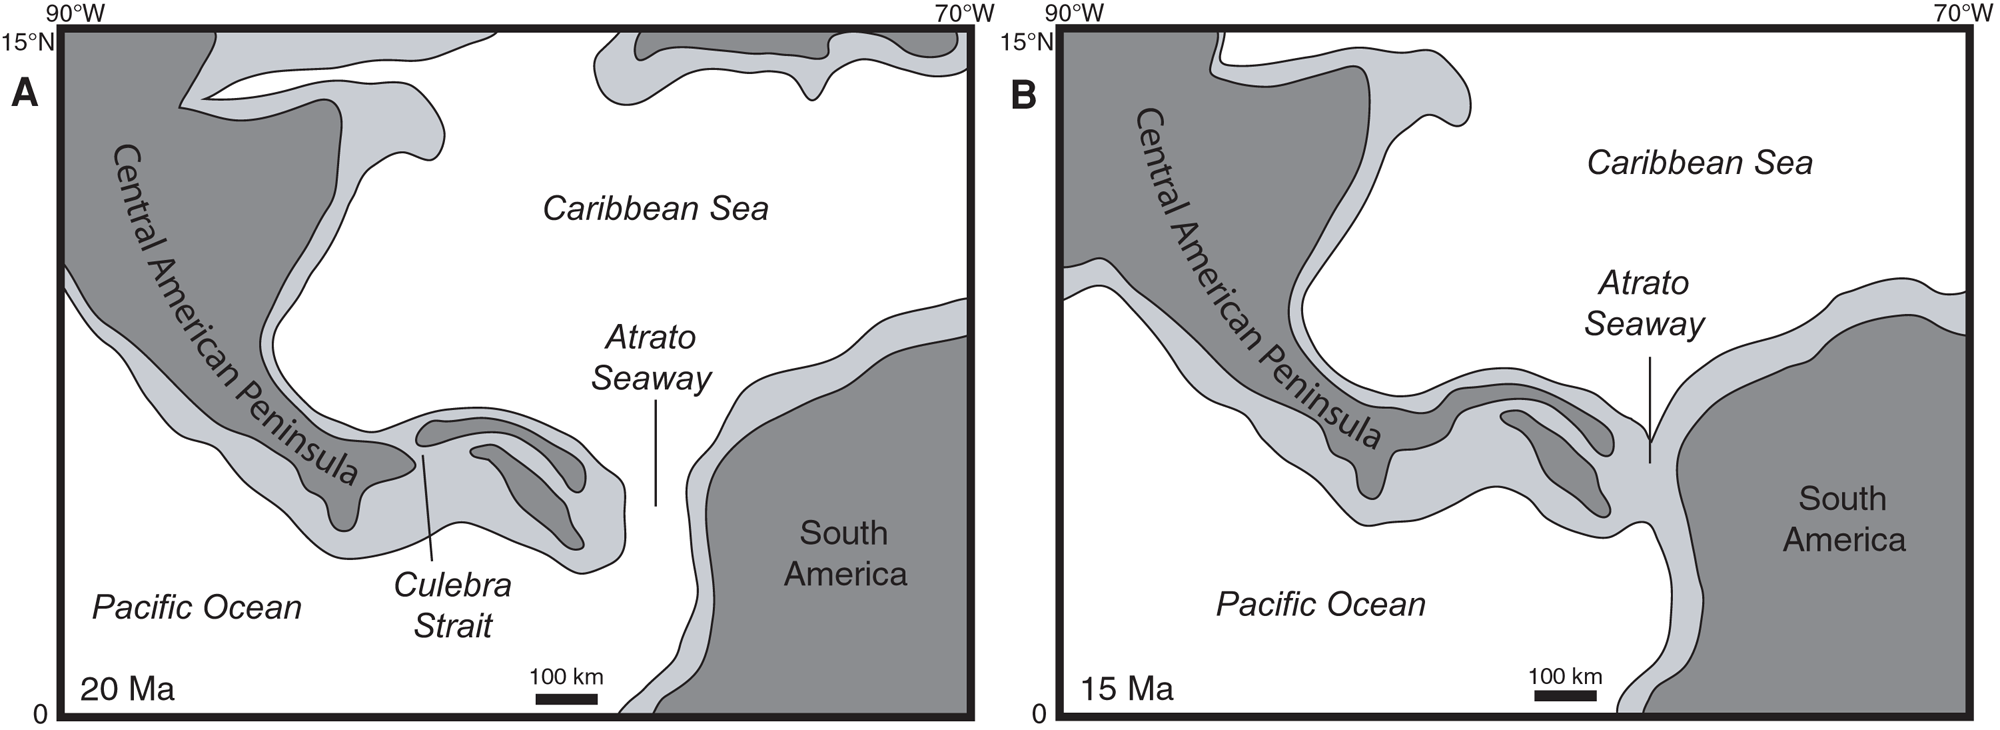 2-Panel image showing stages in the formation of the Isthmus of Panama at 20 million years ago and 15 million years ago.